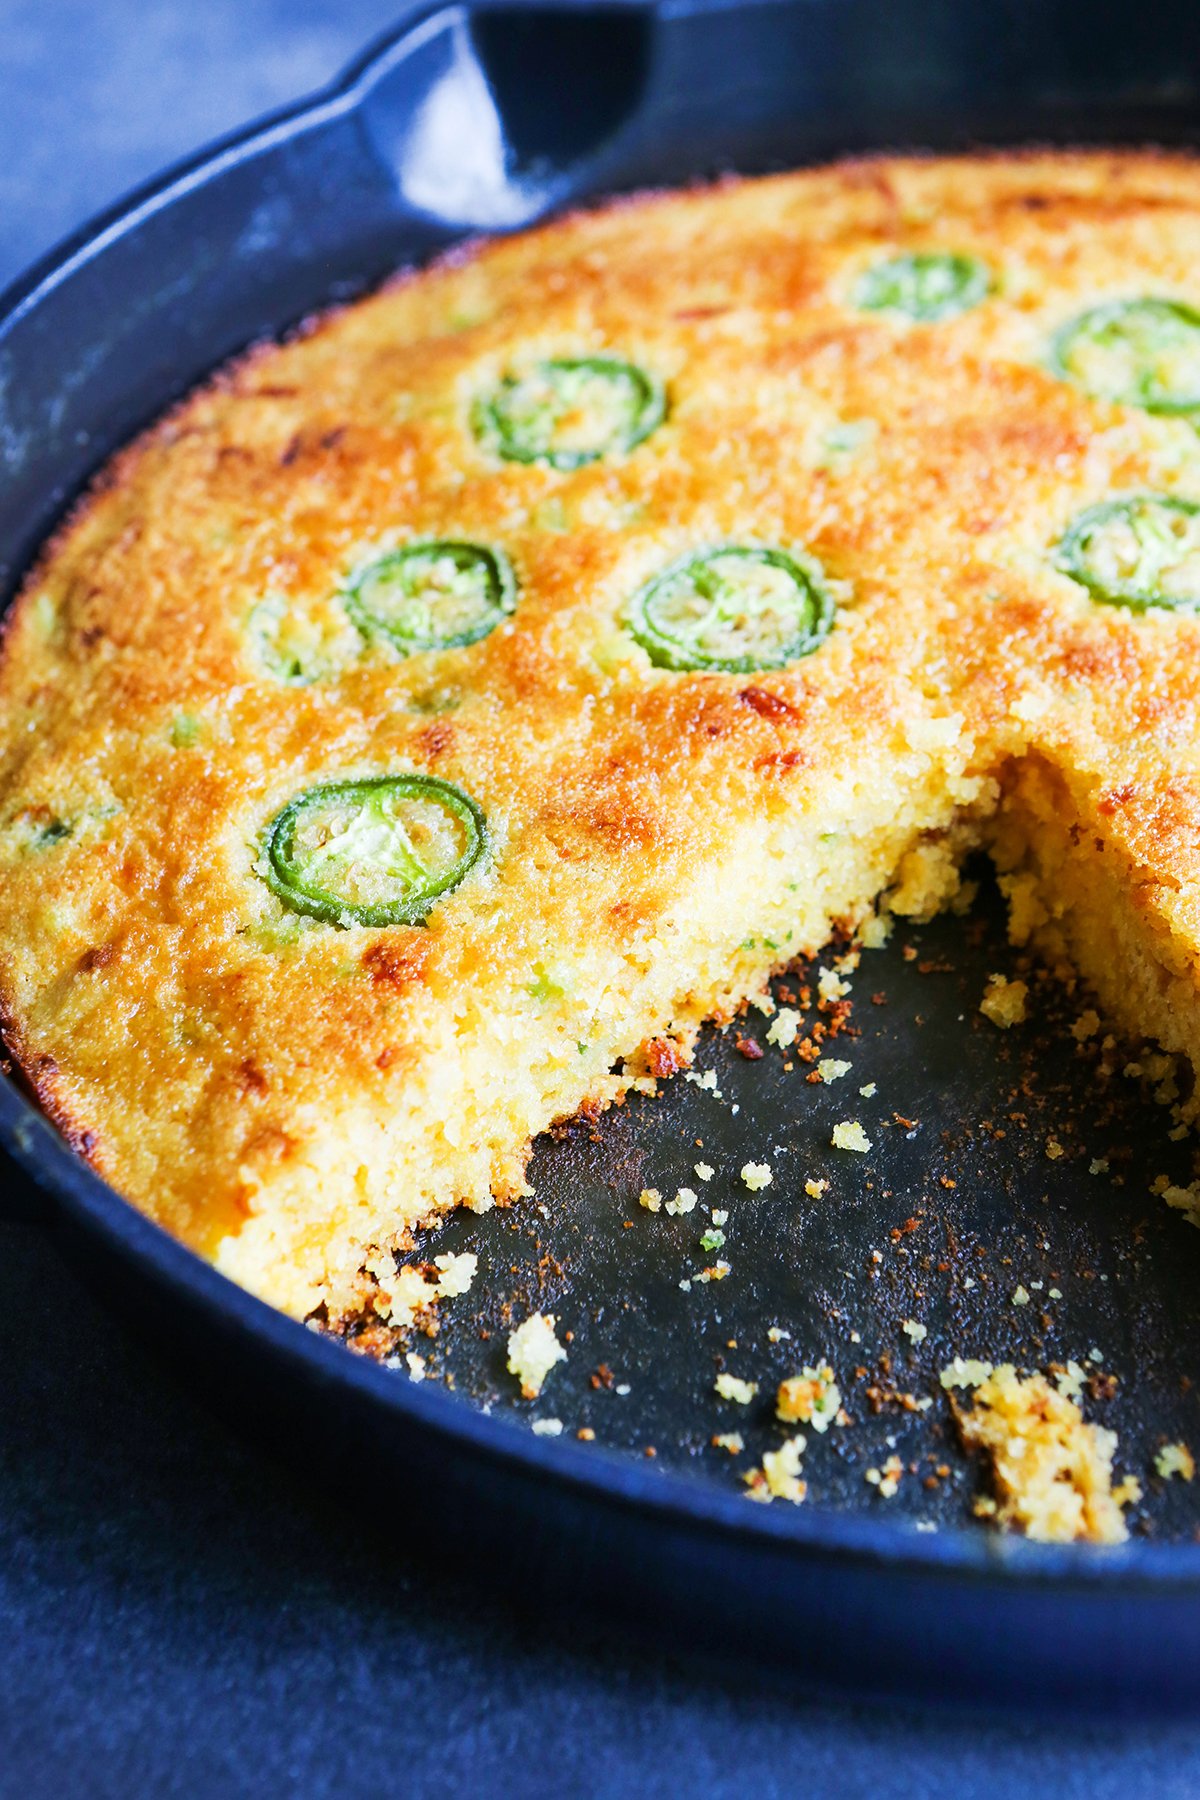 Cornbread in a cast iron skillet with a slice removed.